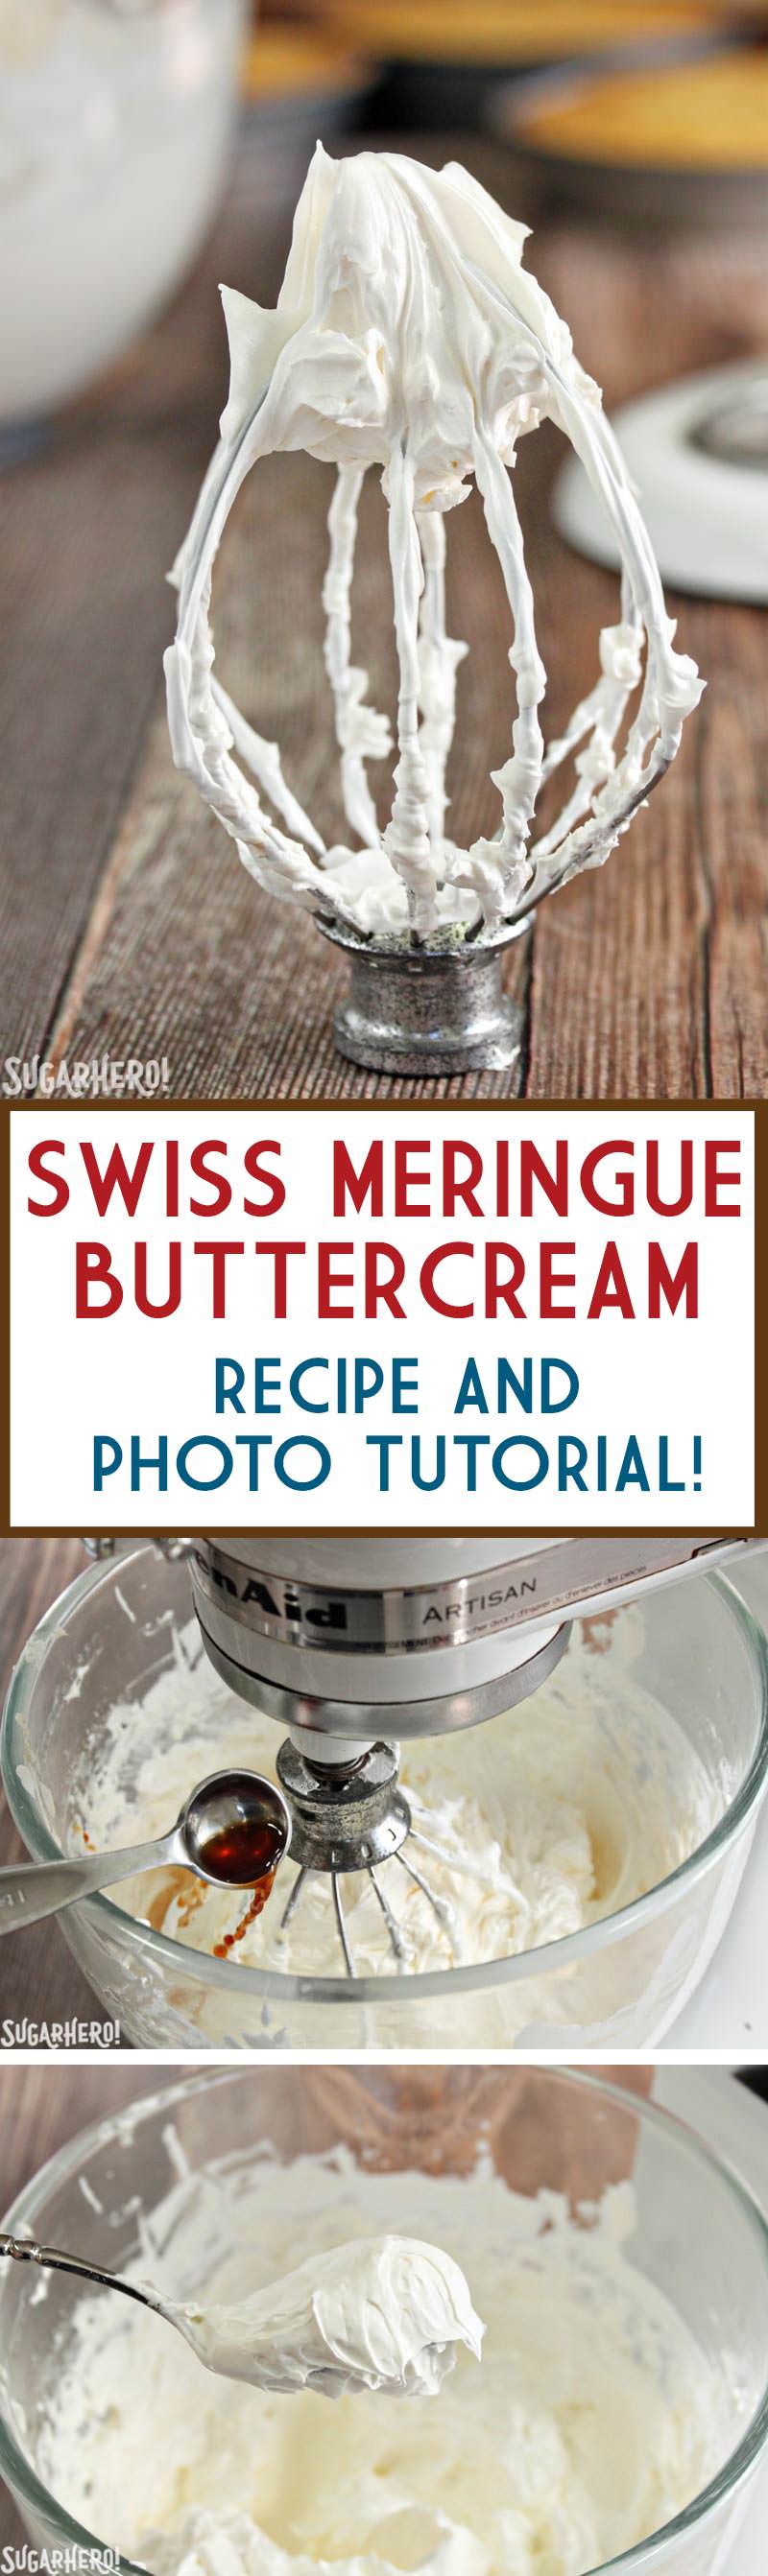 How to Make Swiss Meringue Buttercream - recipe and photo tutorial for making the best frosting ever! | From SugarHero.com